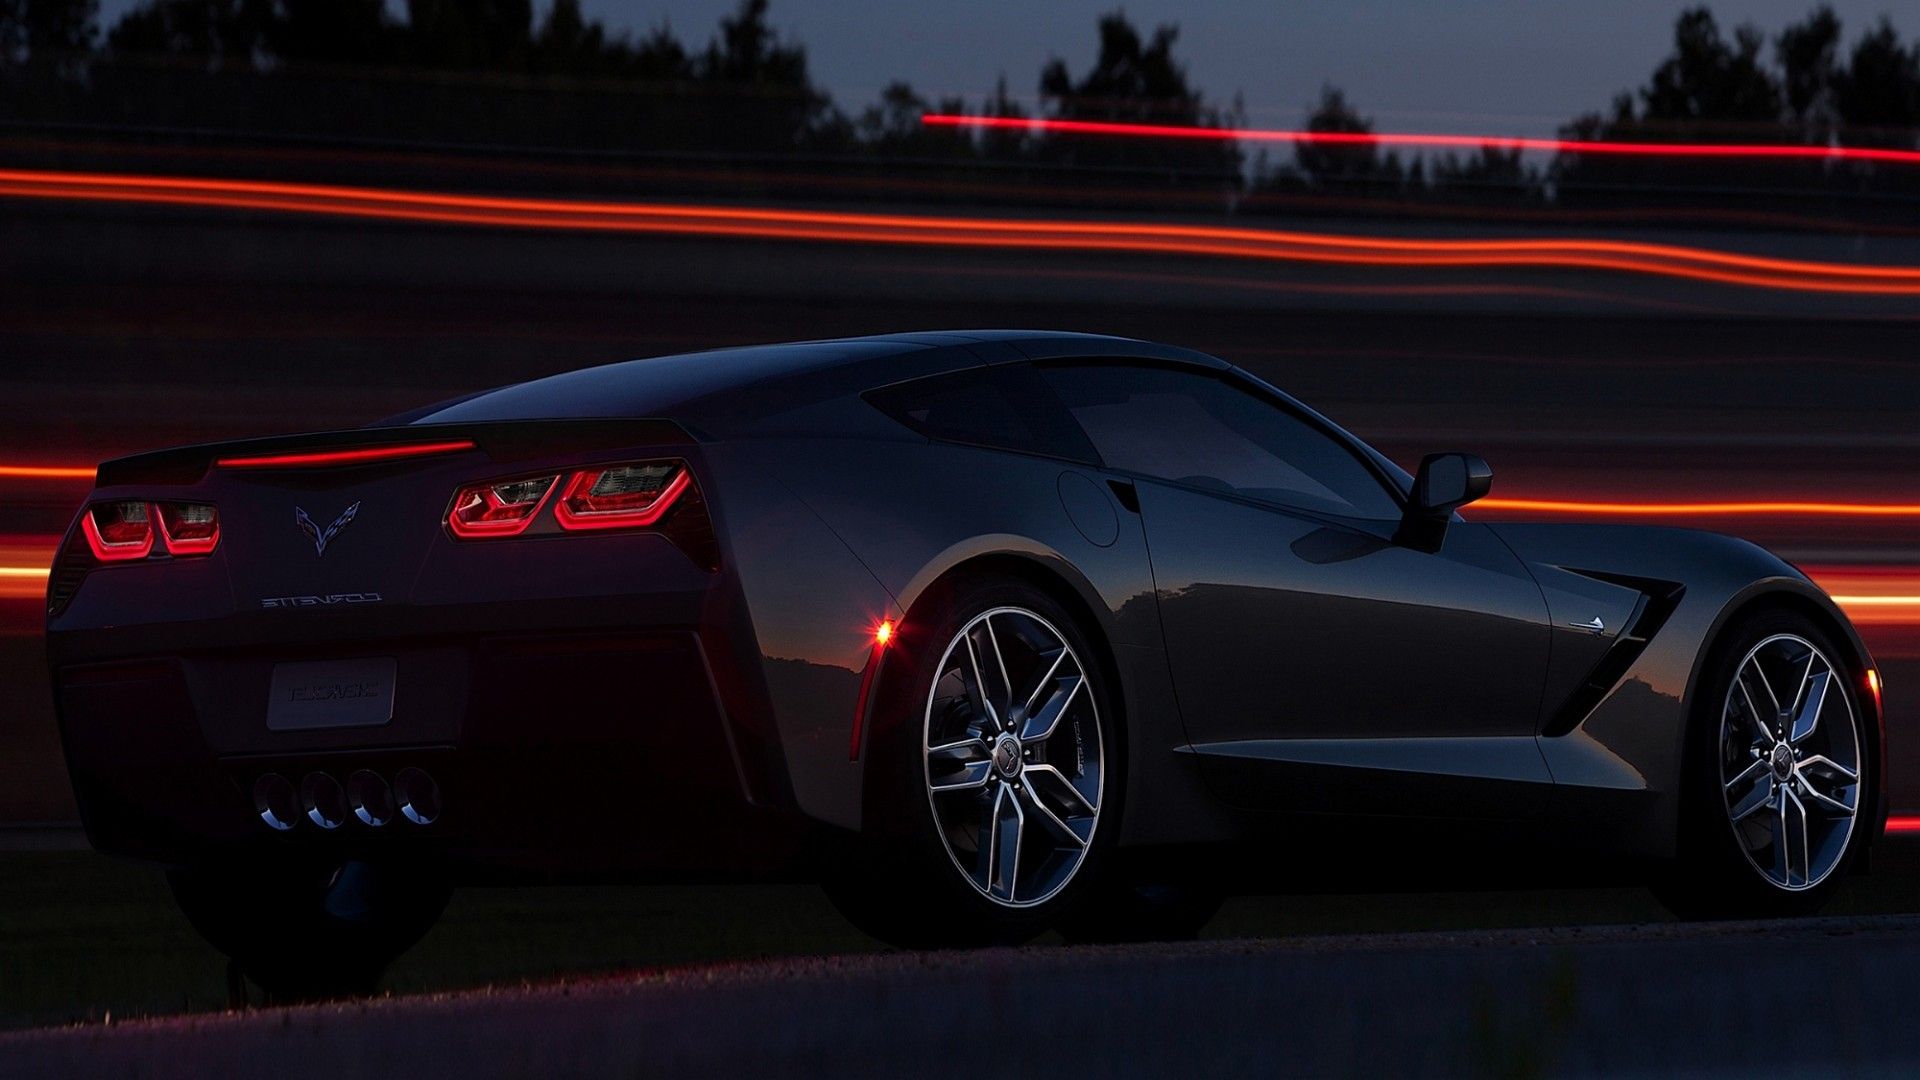 Chevrolet Corvette Stingray 70th Anniversary Coupe 2022 2 4K 5K HD Cars  Wallpapers  HD Wallpapers  ID 106239